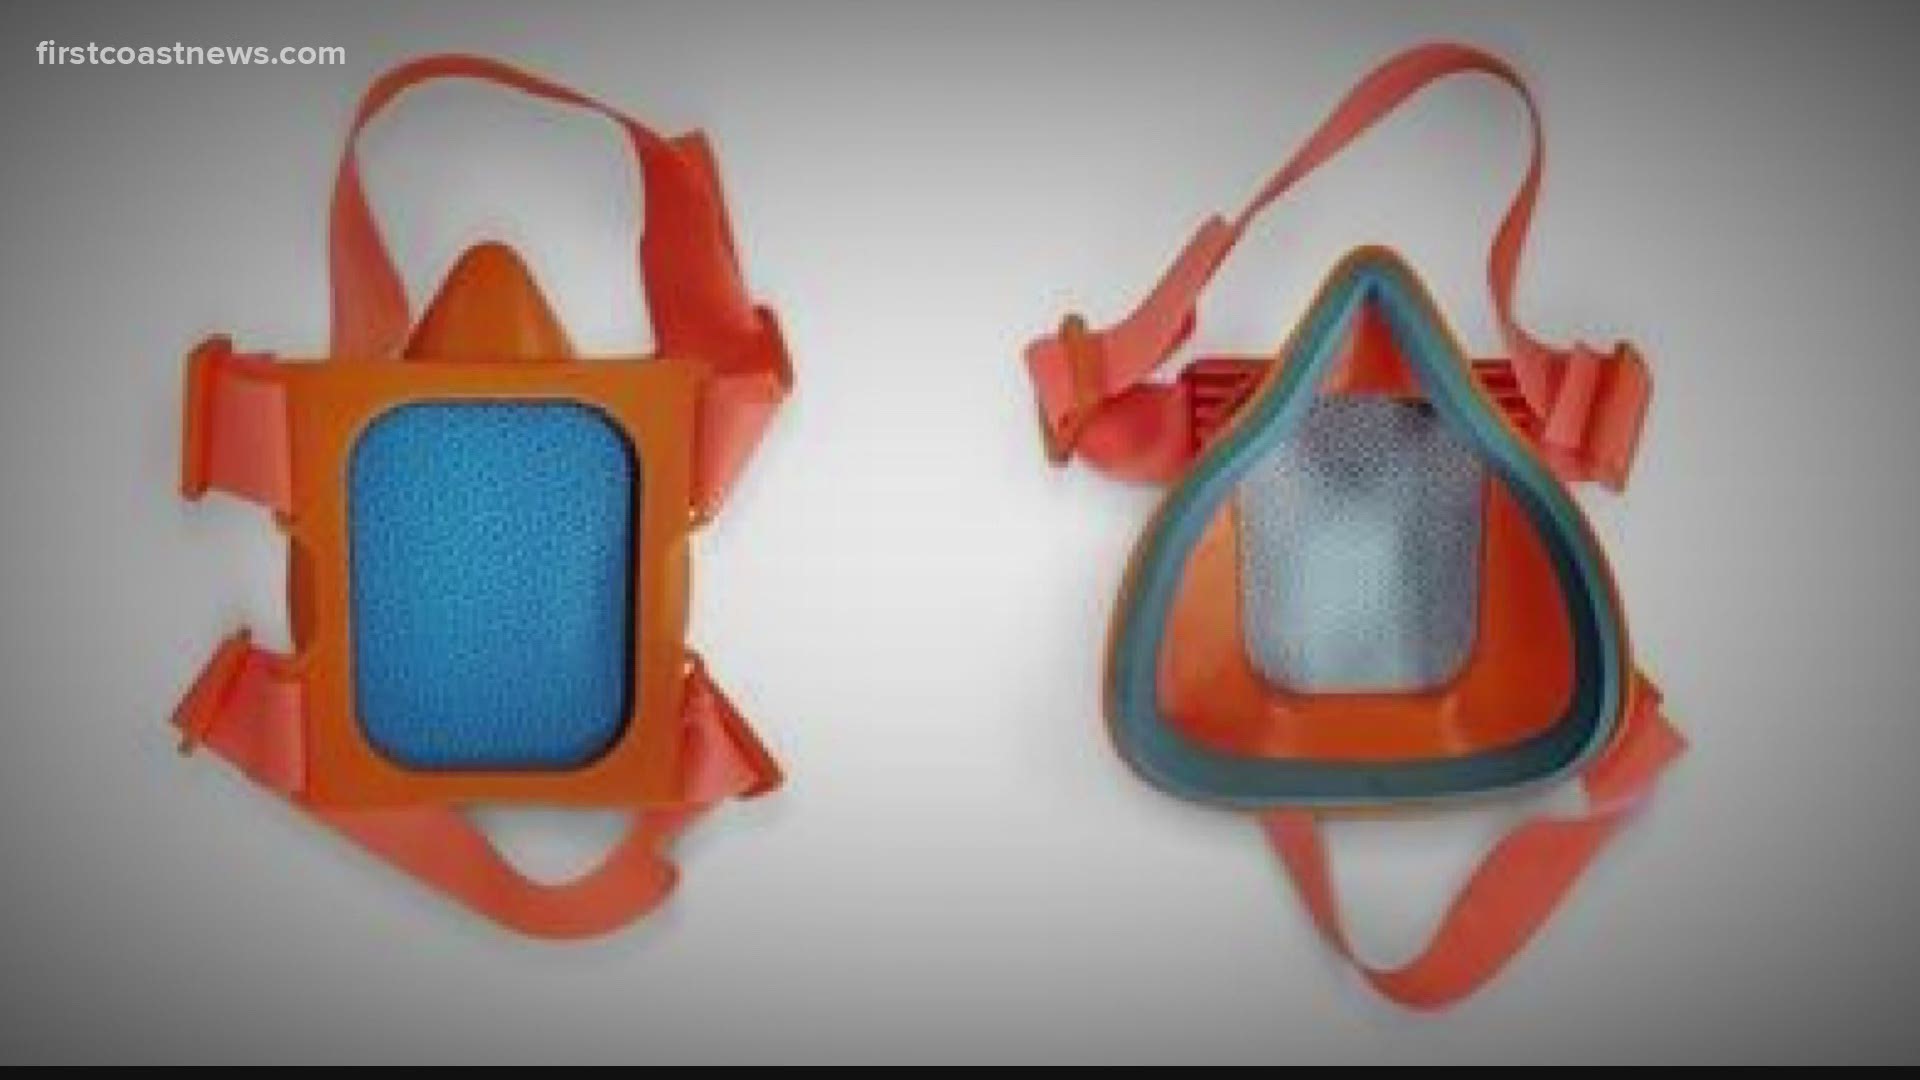 The company is making plastic face shields which hospitals can then place filters into making the masks reusable.